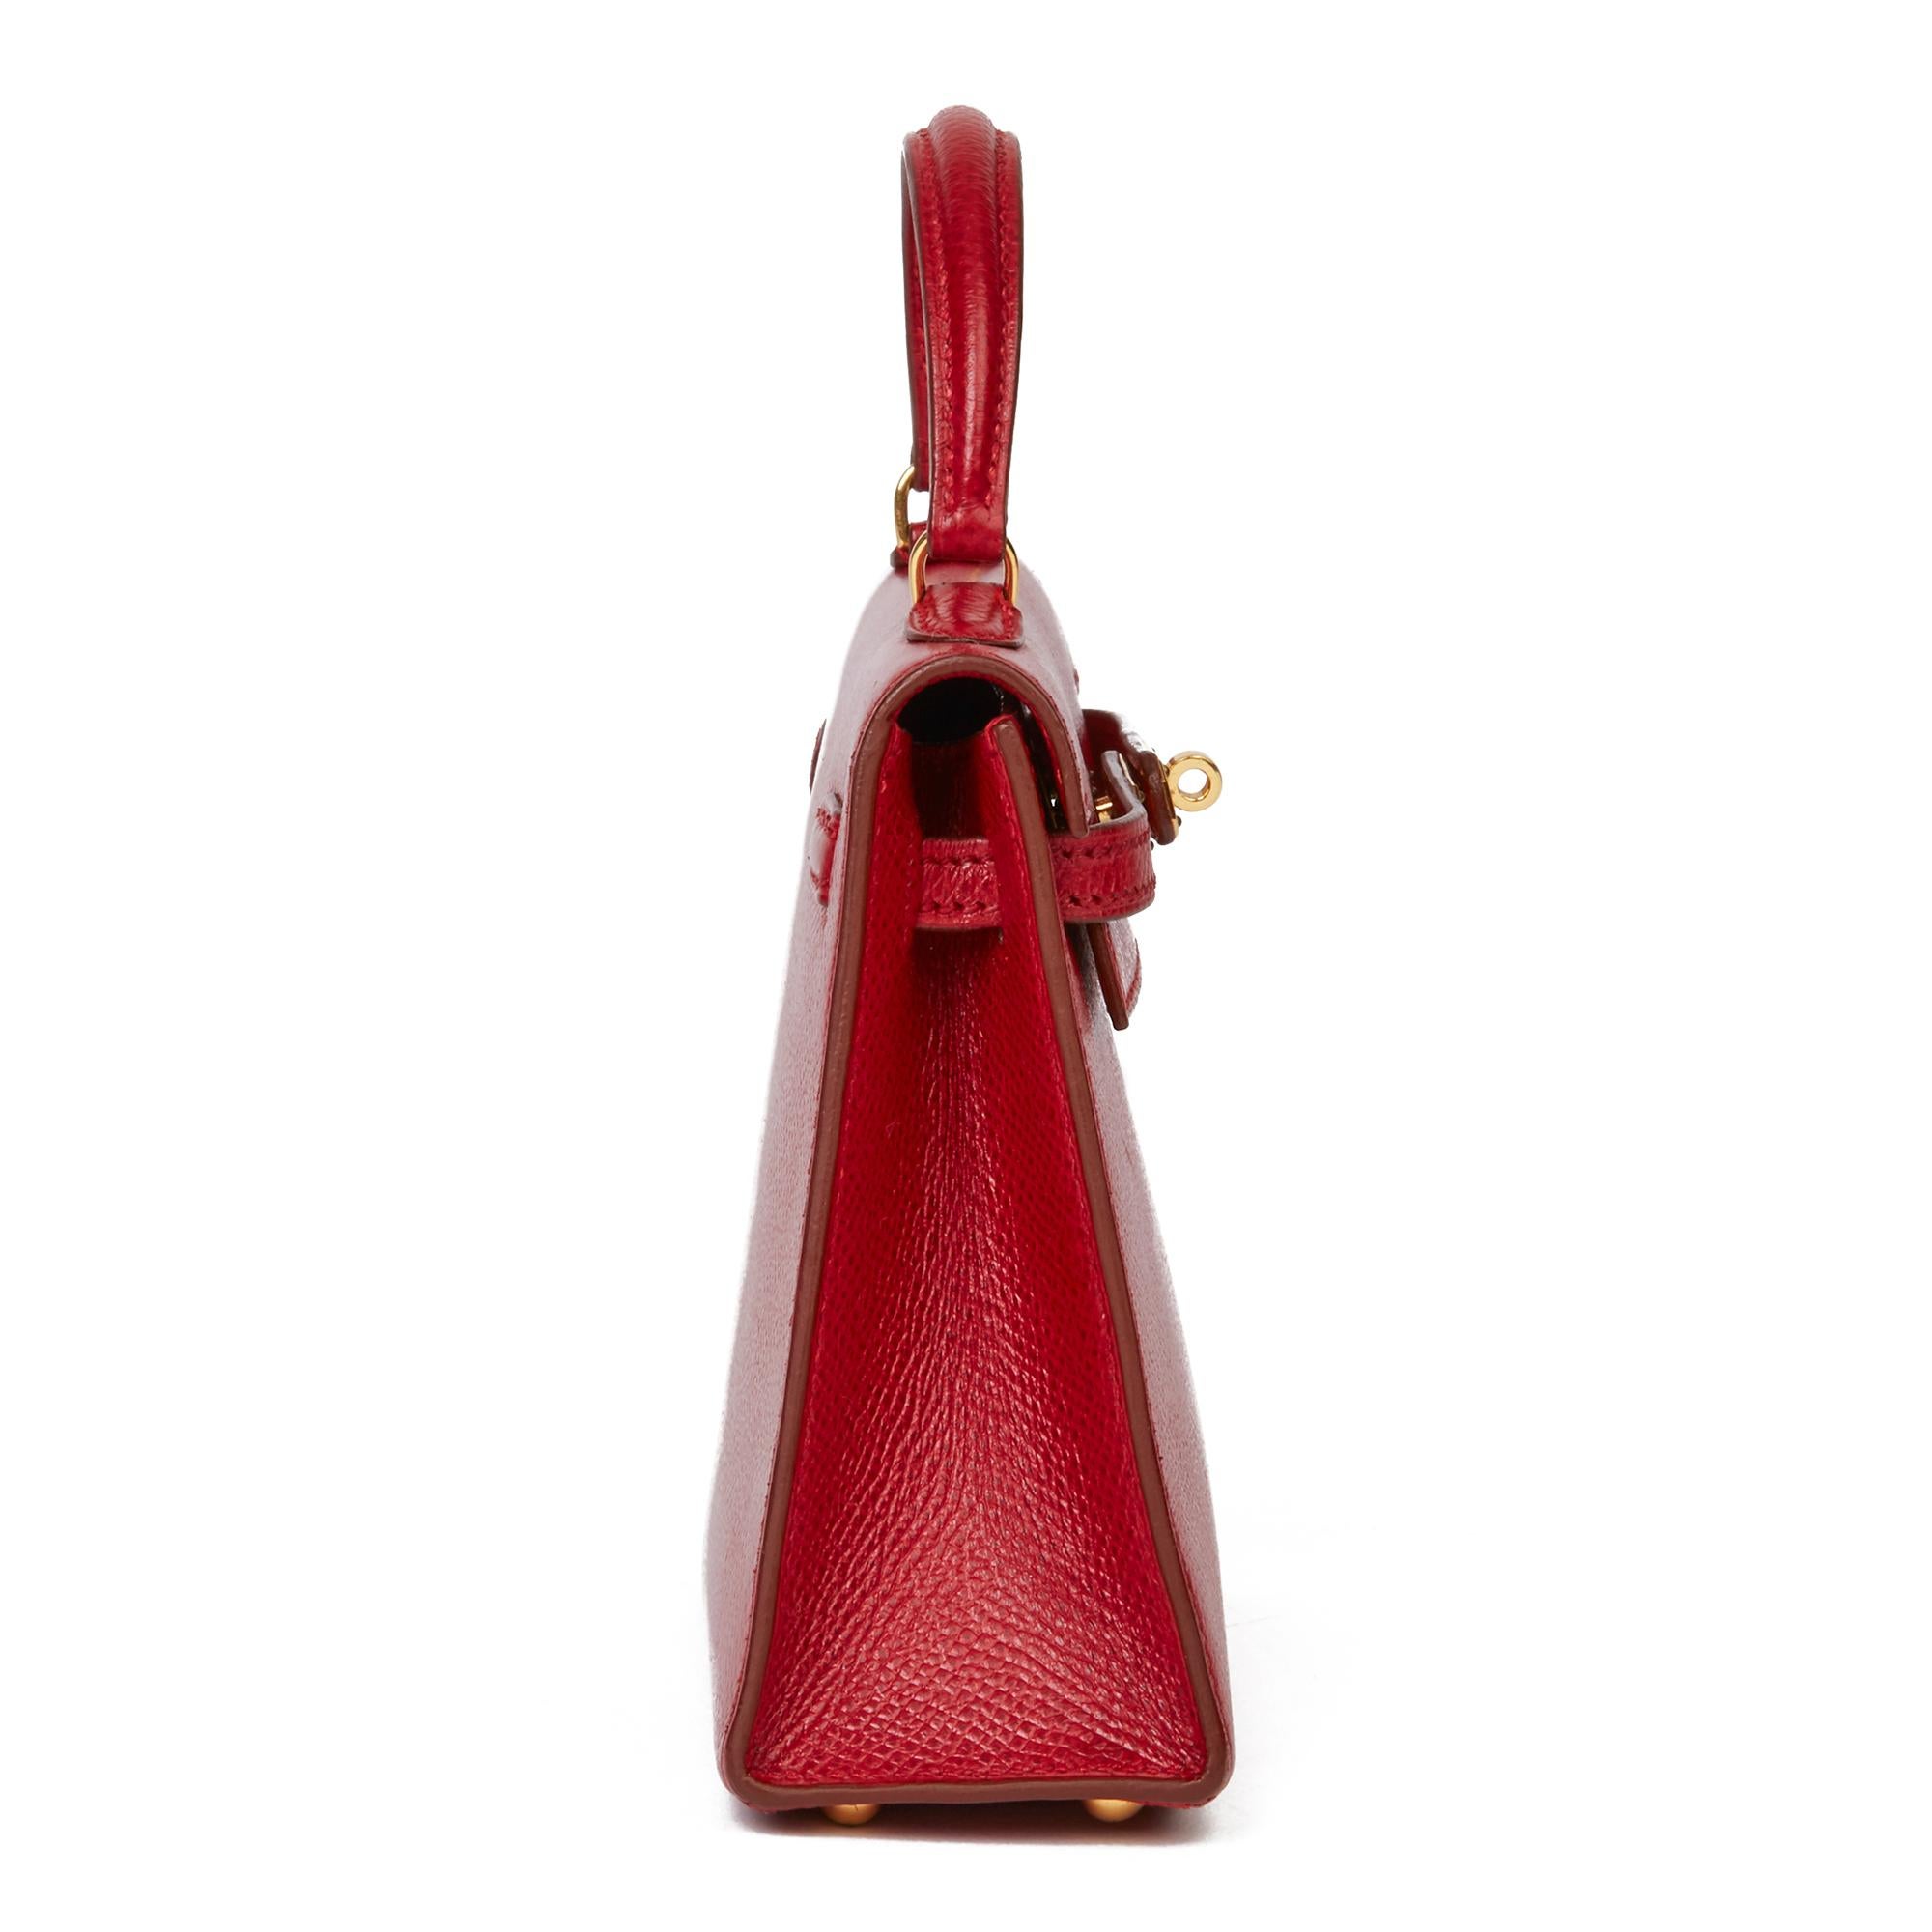 HERMÈS
Rouge Vif Courchevel Leather Vintage Kelly 15cm Sellier

Xupes Reference: JJLG004
Serial Number: (X)
Age (Circa): 1994
Accompanied By: Hermès Dust Bag, Box, Shoulder Strap
Authenticity Details: Date Stamp (Made in France)
Gender: Ladies
Type: